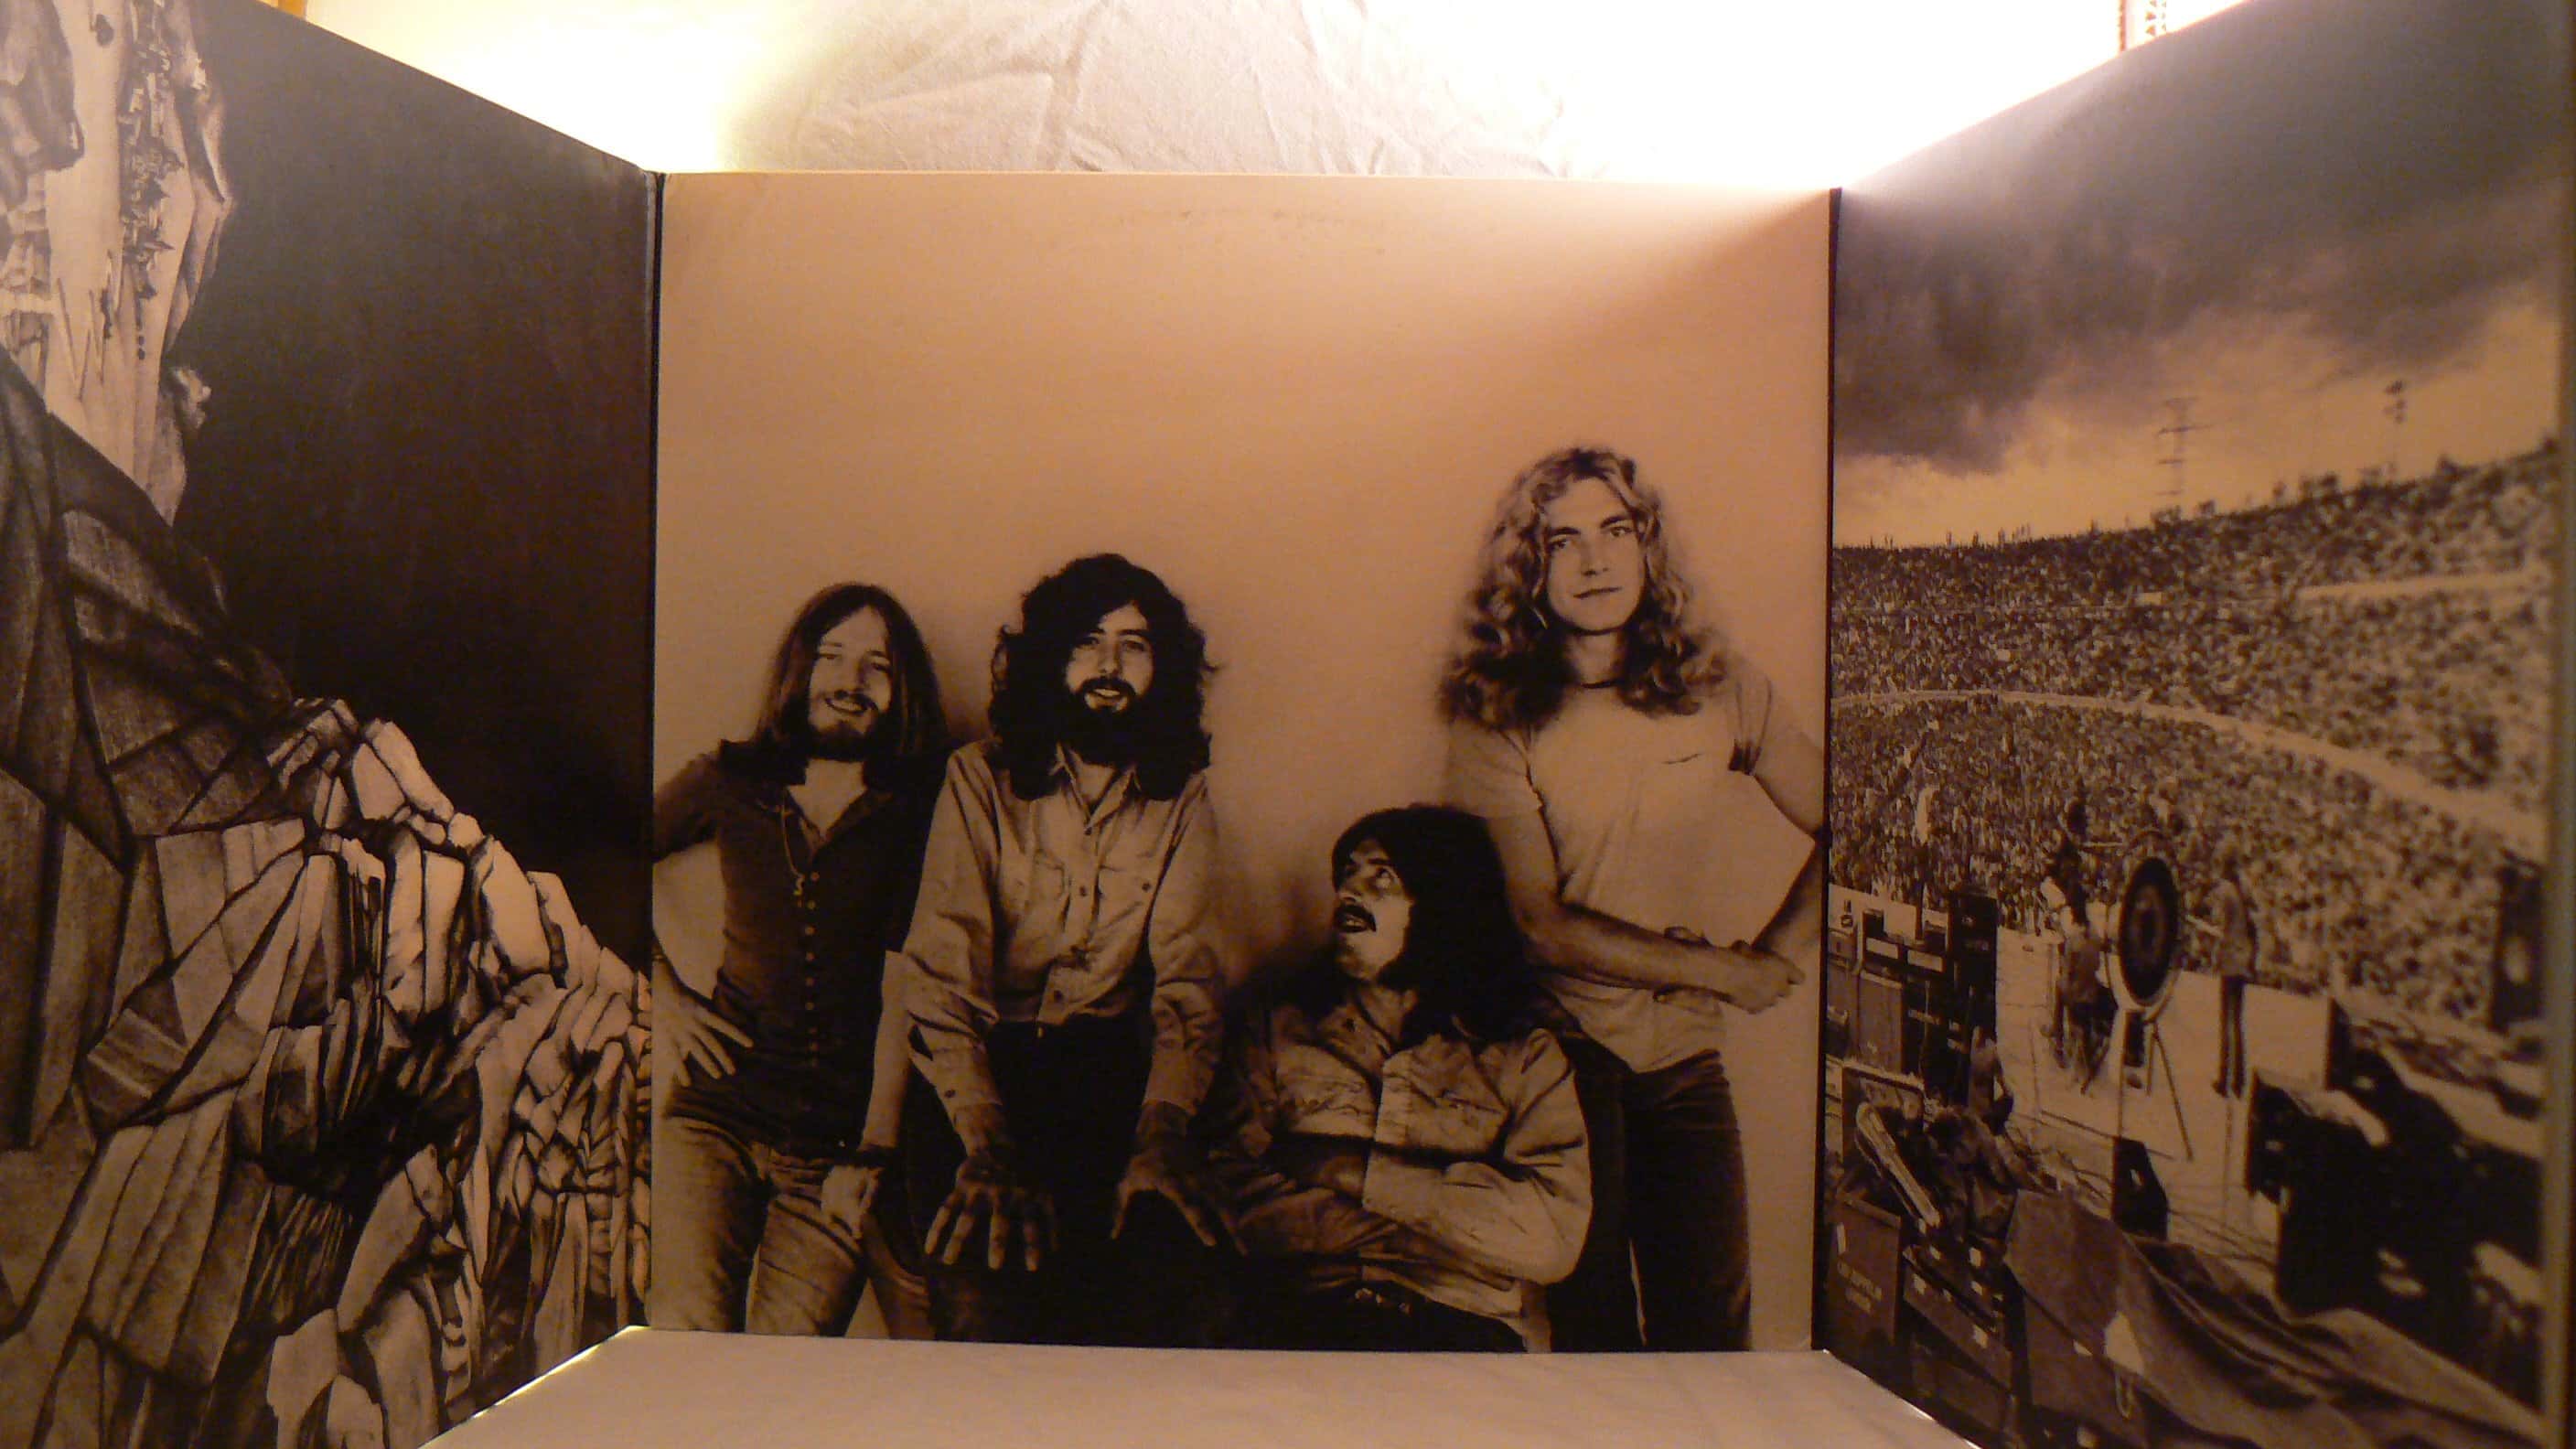 Led Zeppelin facts 